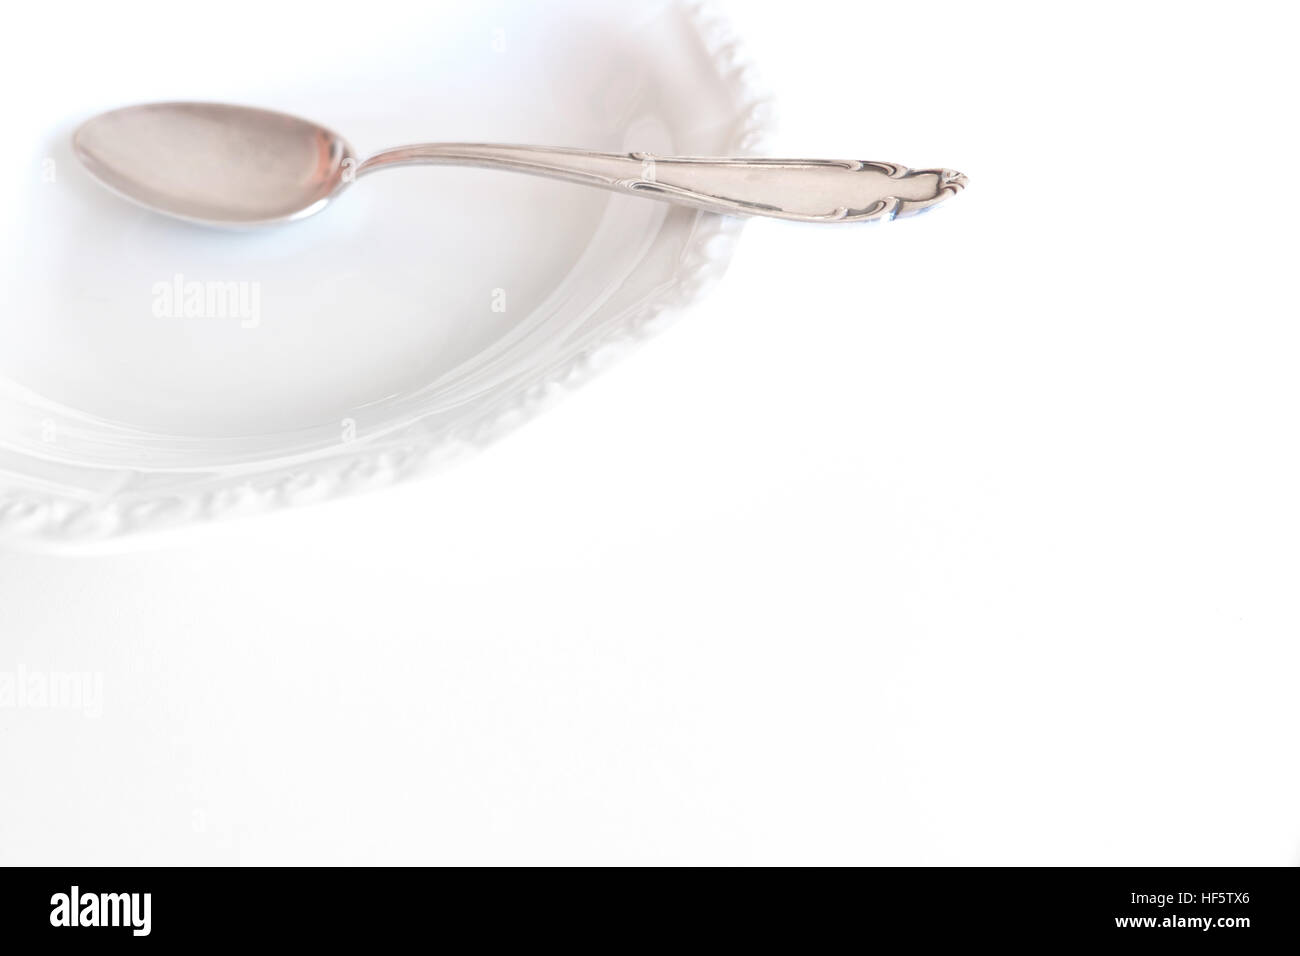 empty plate with silver spoon isolated on white background Stock Photo